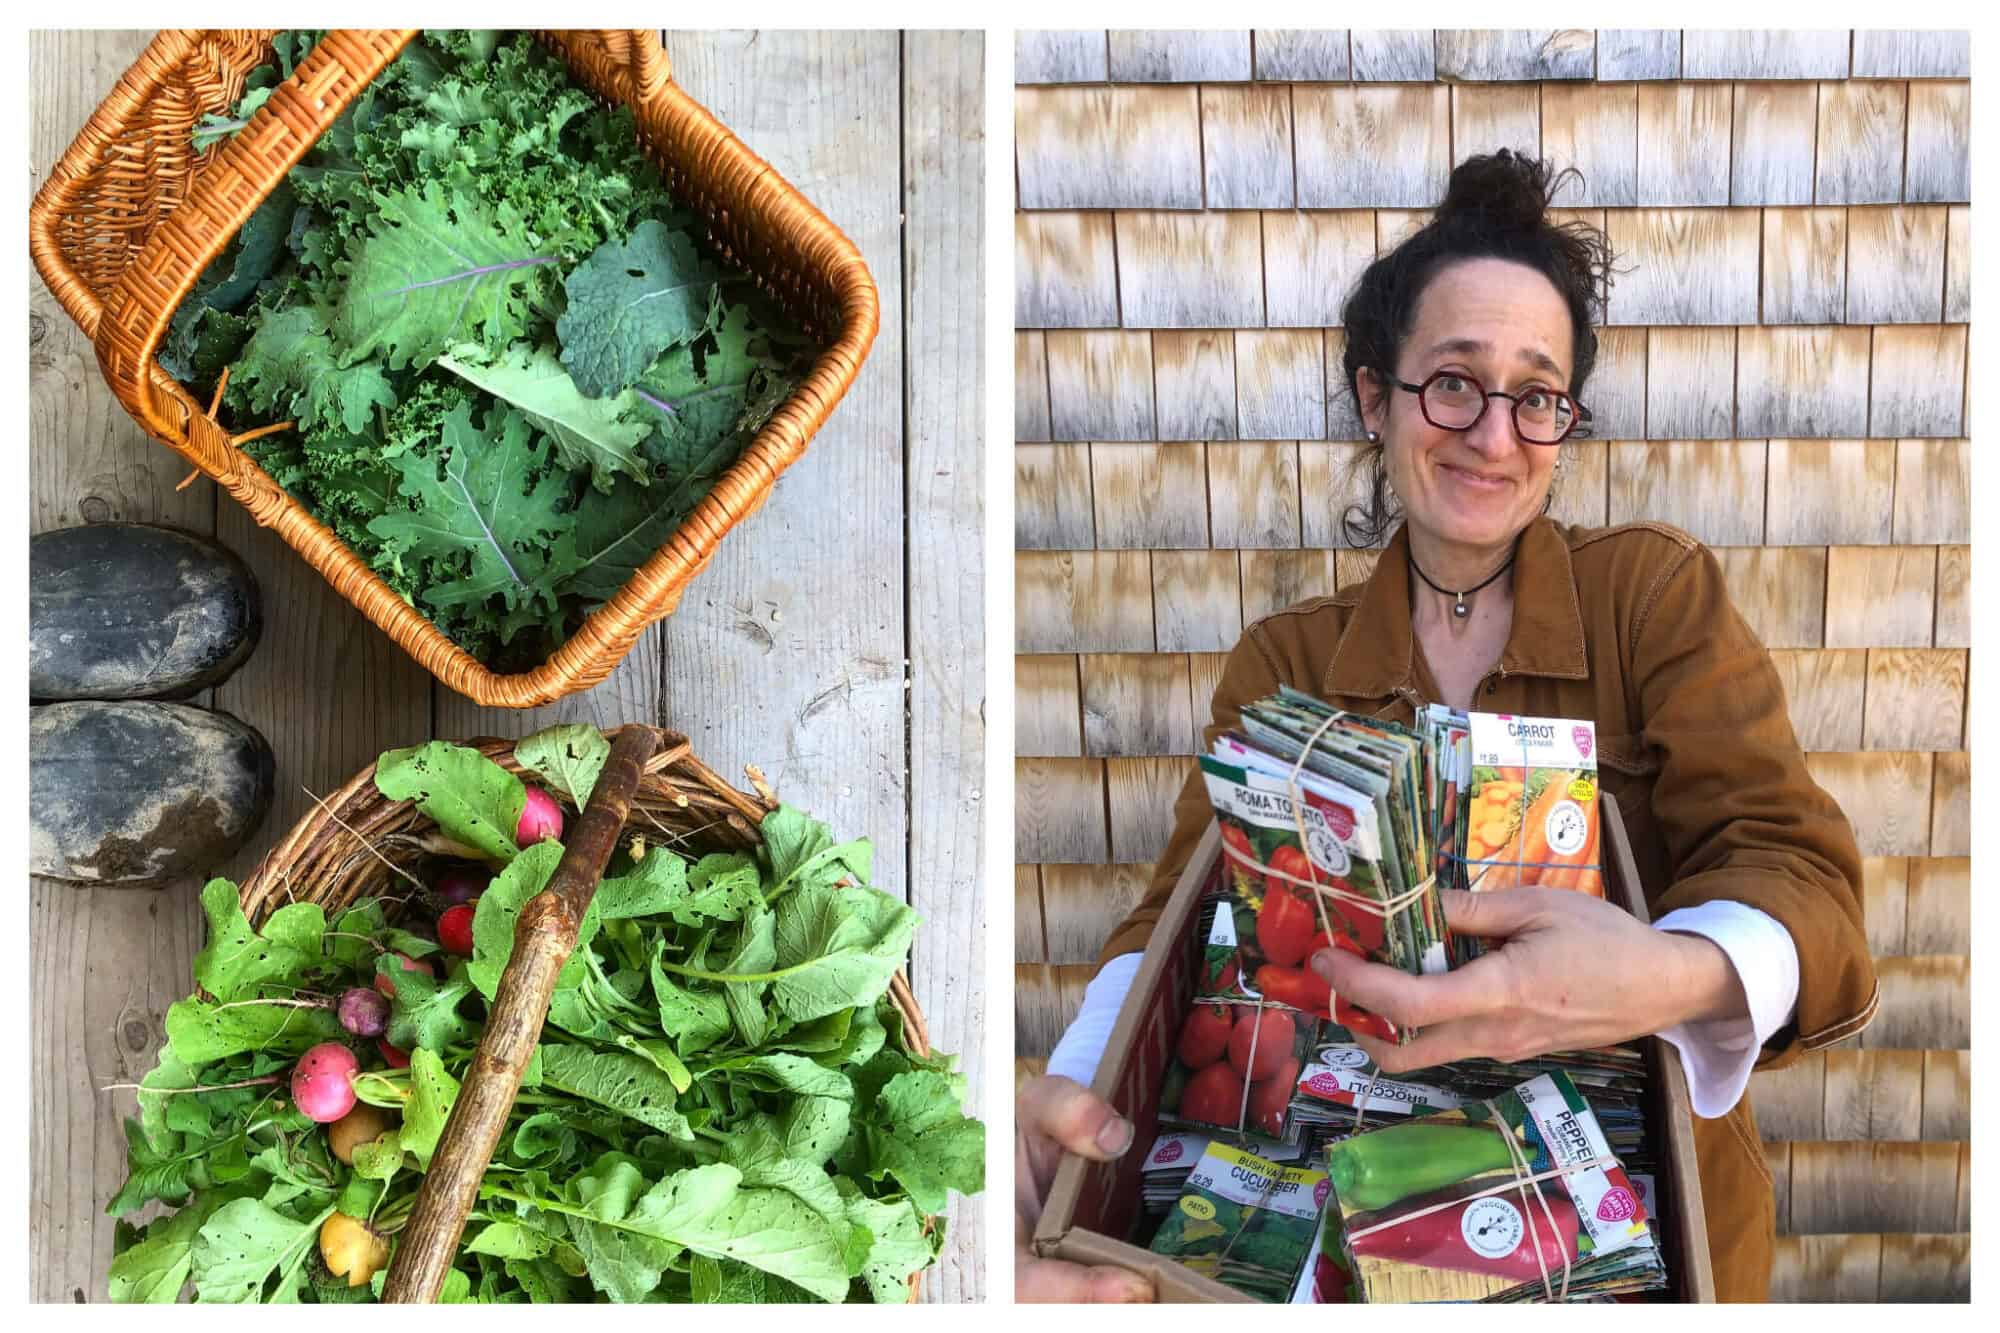 Left: A pair of muddy boots next to two baskets of fresh produce picked from a garden, including kale and radishes, Right: Erica Berman, founder of both HiP Paris and Veggies to Table, hold 1100 seed packets she is about to donate to pantries so people can grow their own gardens.